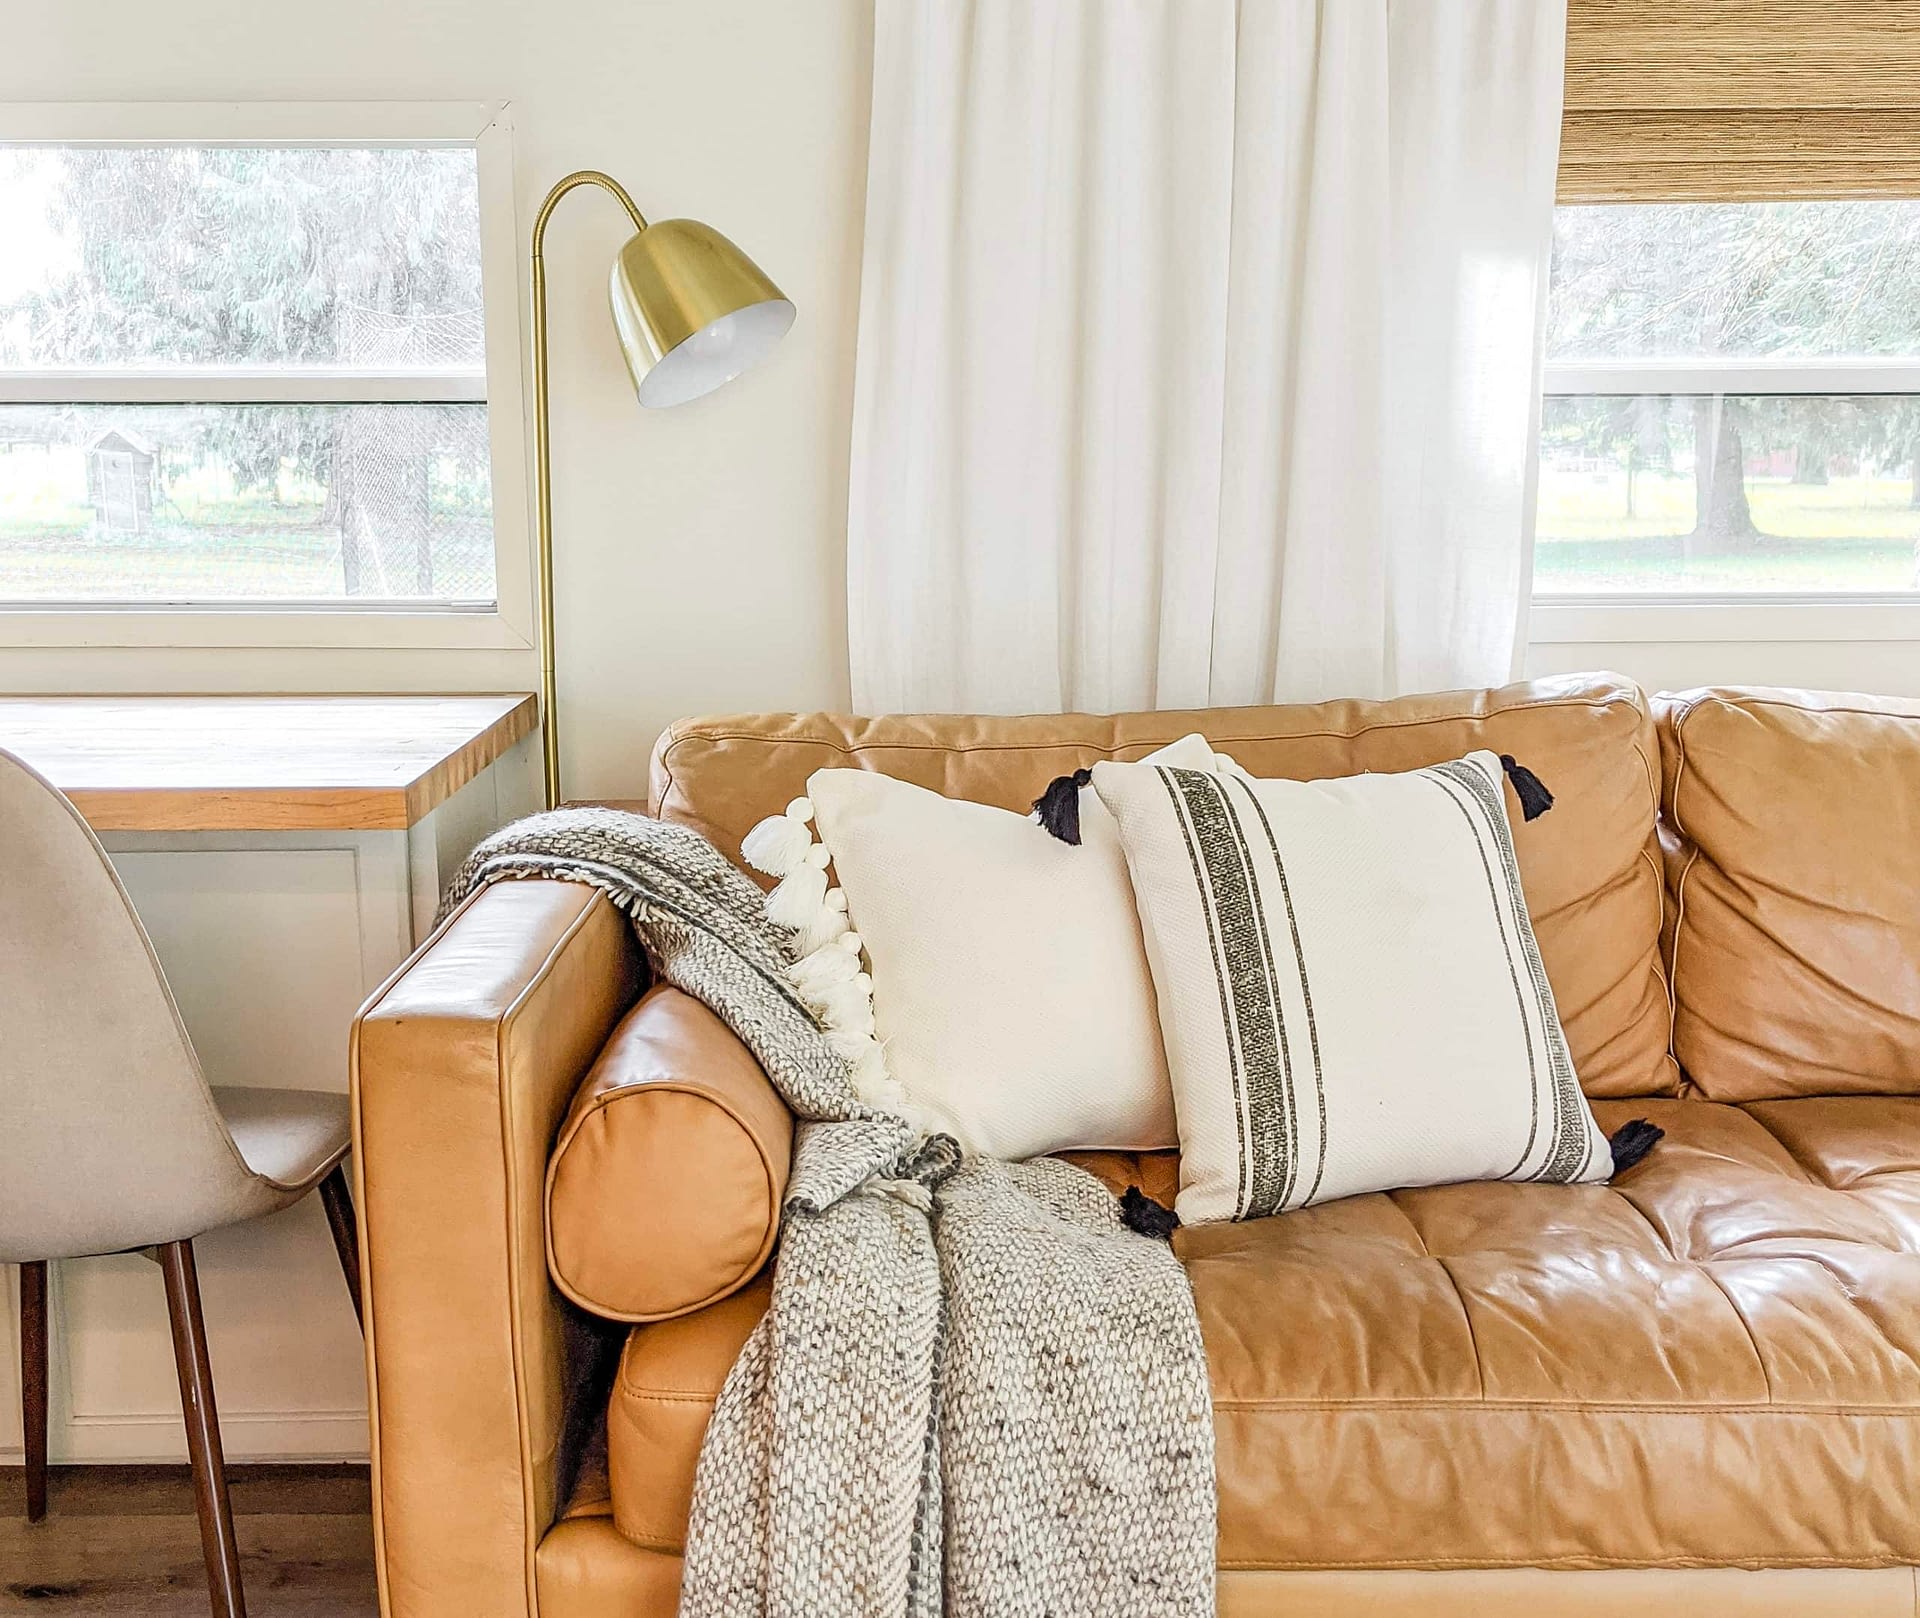 10 Pillow Combinations For Brown Couch, Brown Leather Pillows